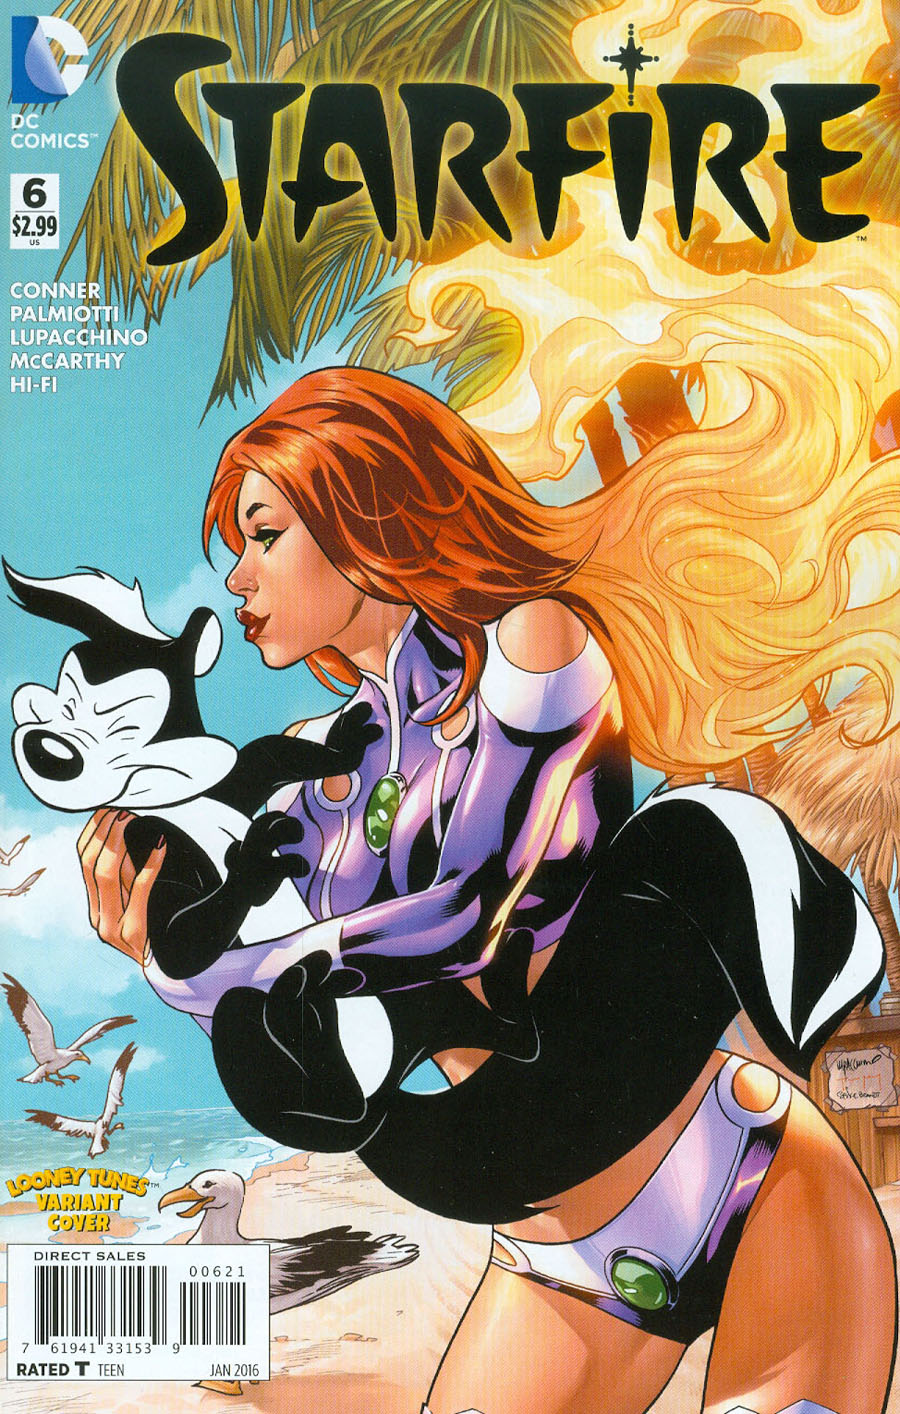 Starfire Vol 2 #6 Cover B Variant Emanuela Lupacchino & Warner Bros Animation DC x Looney Tunes Cover